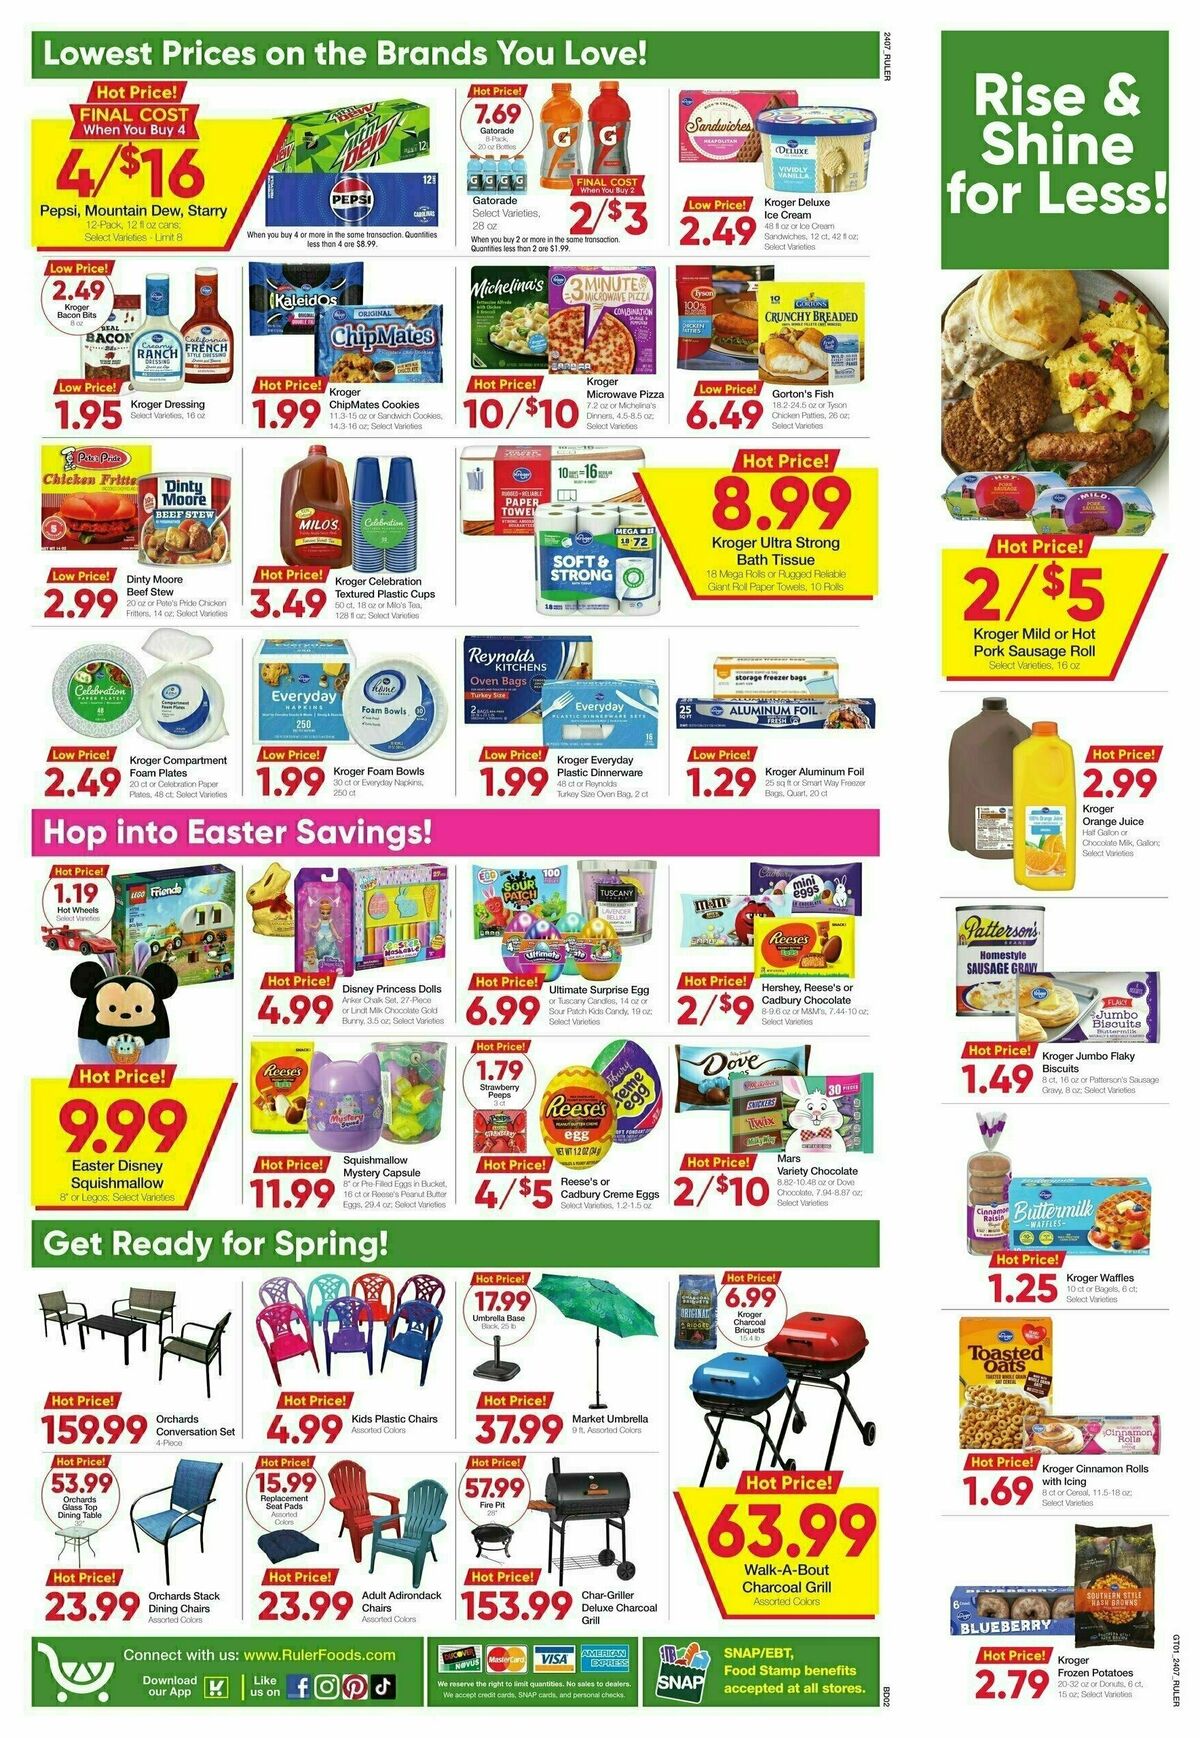 Ruler Foods Weekly Ad from March 20